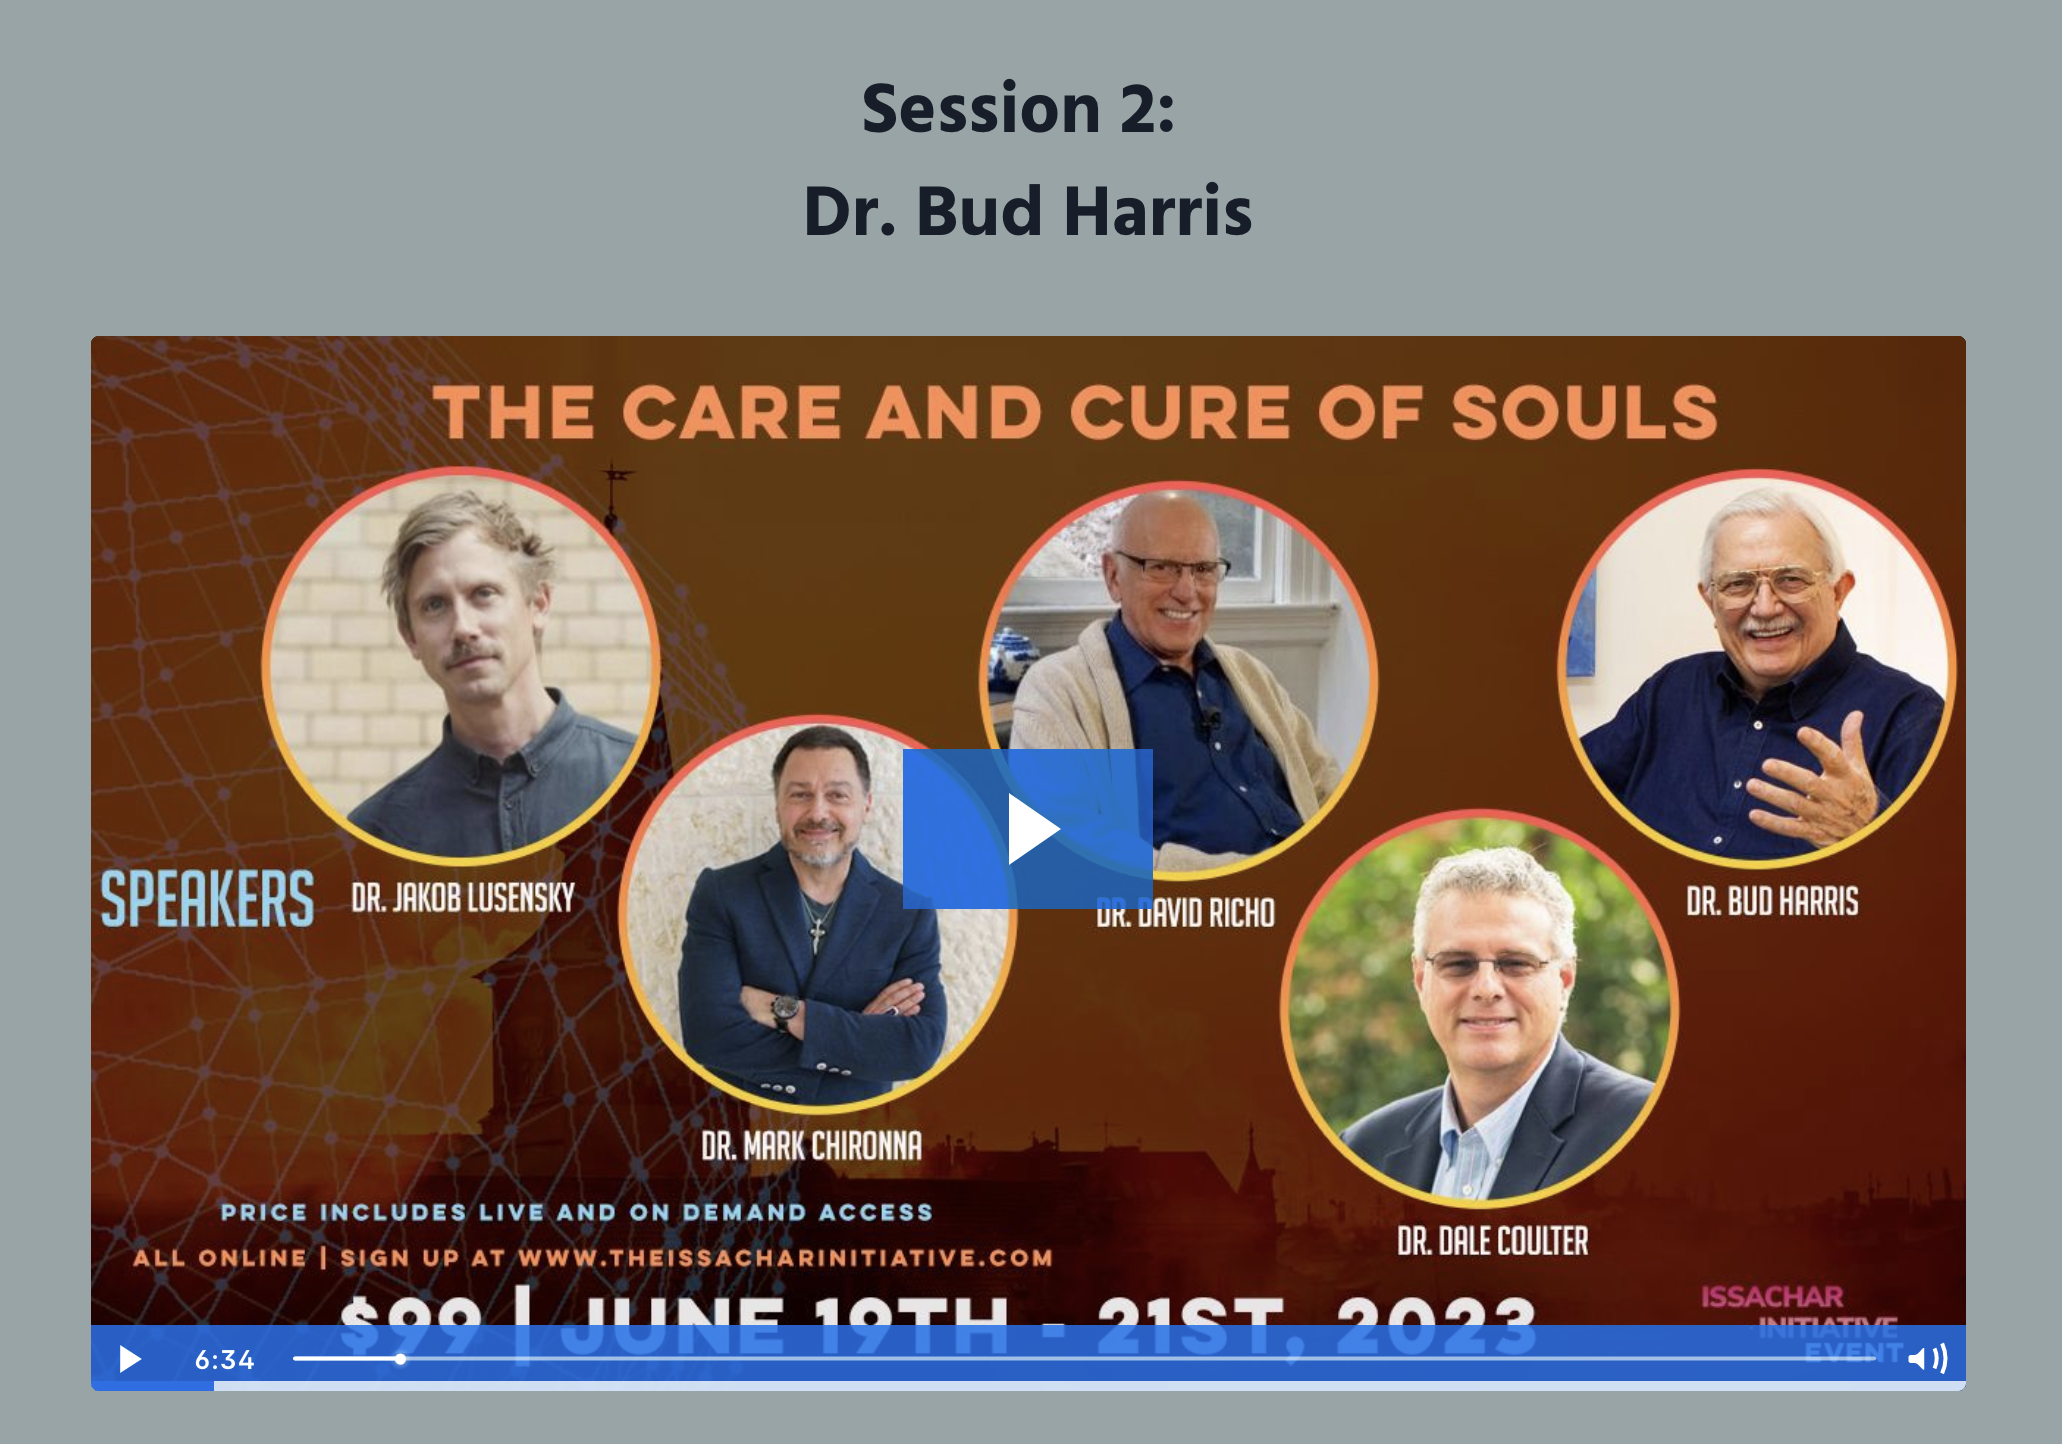 The Care and Cure of Souls with Dr. Bud Harris